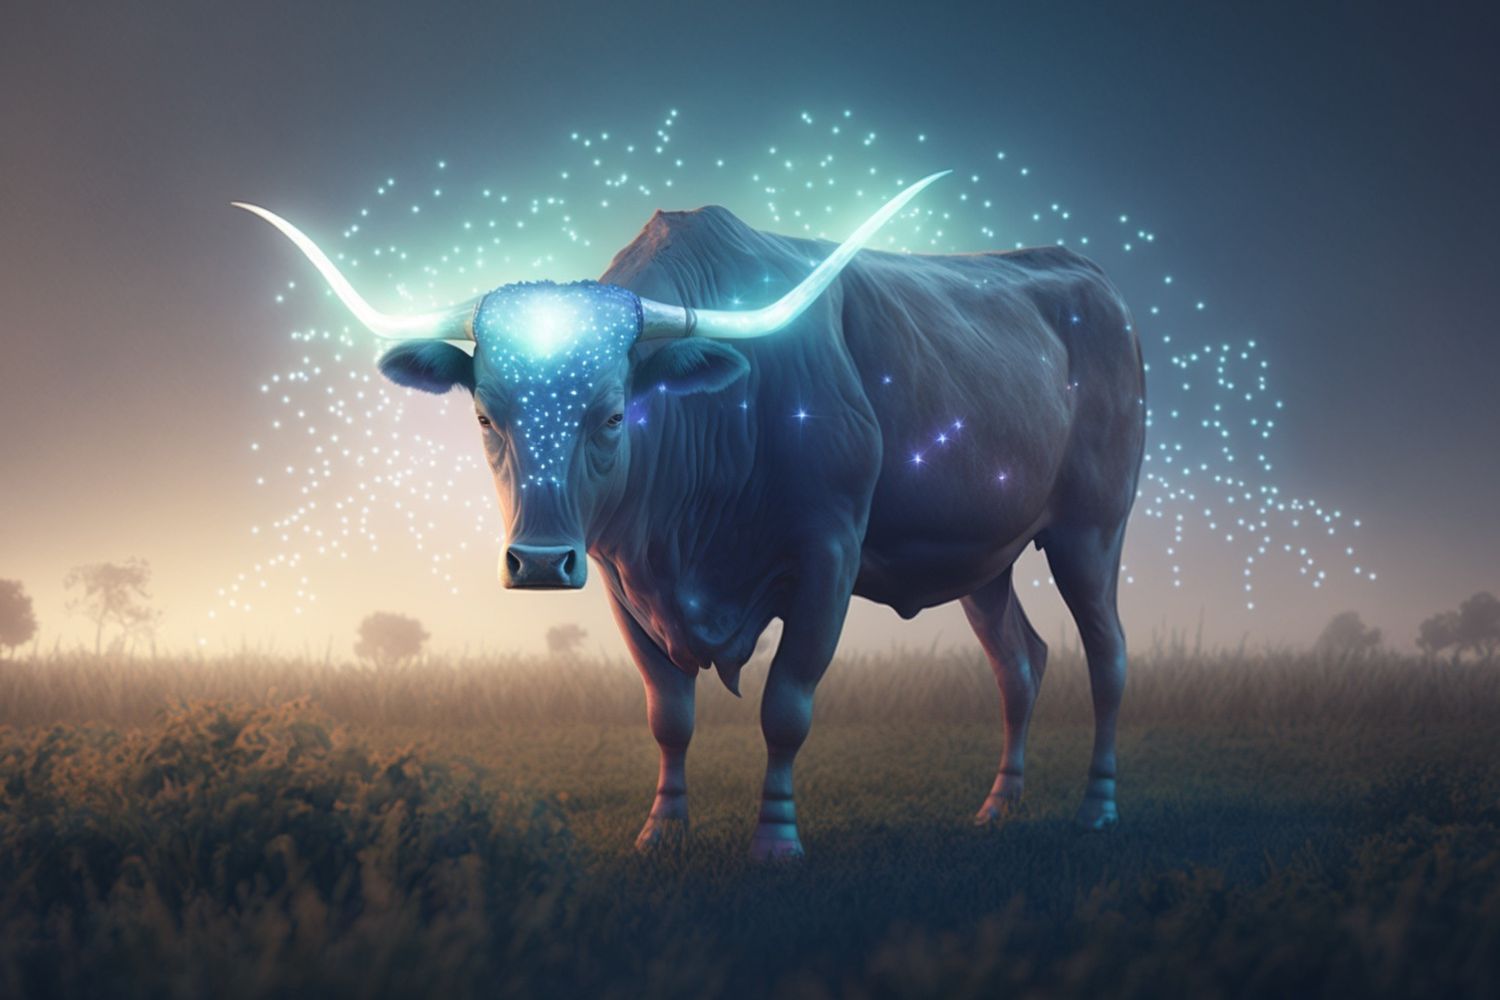  What makes Taurus individuals stable, passionate, and connected to the cosmos?